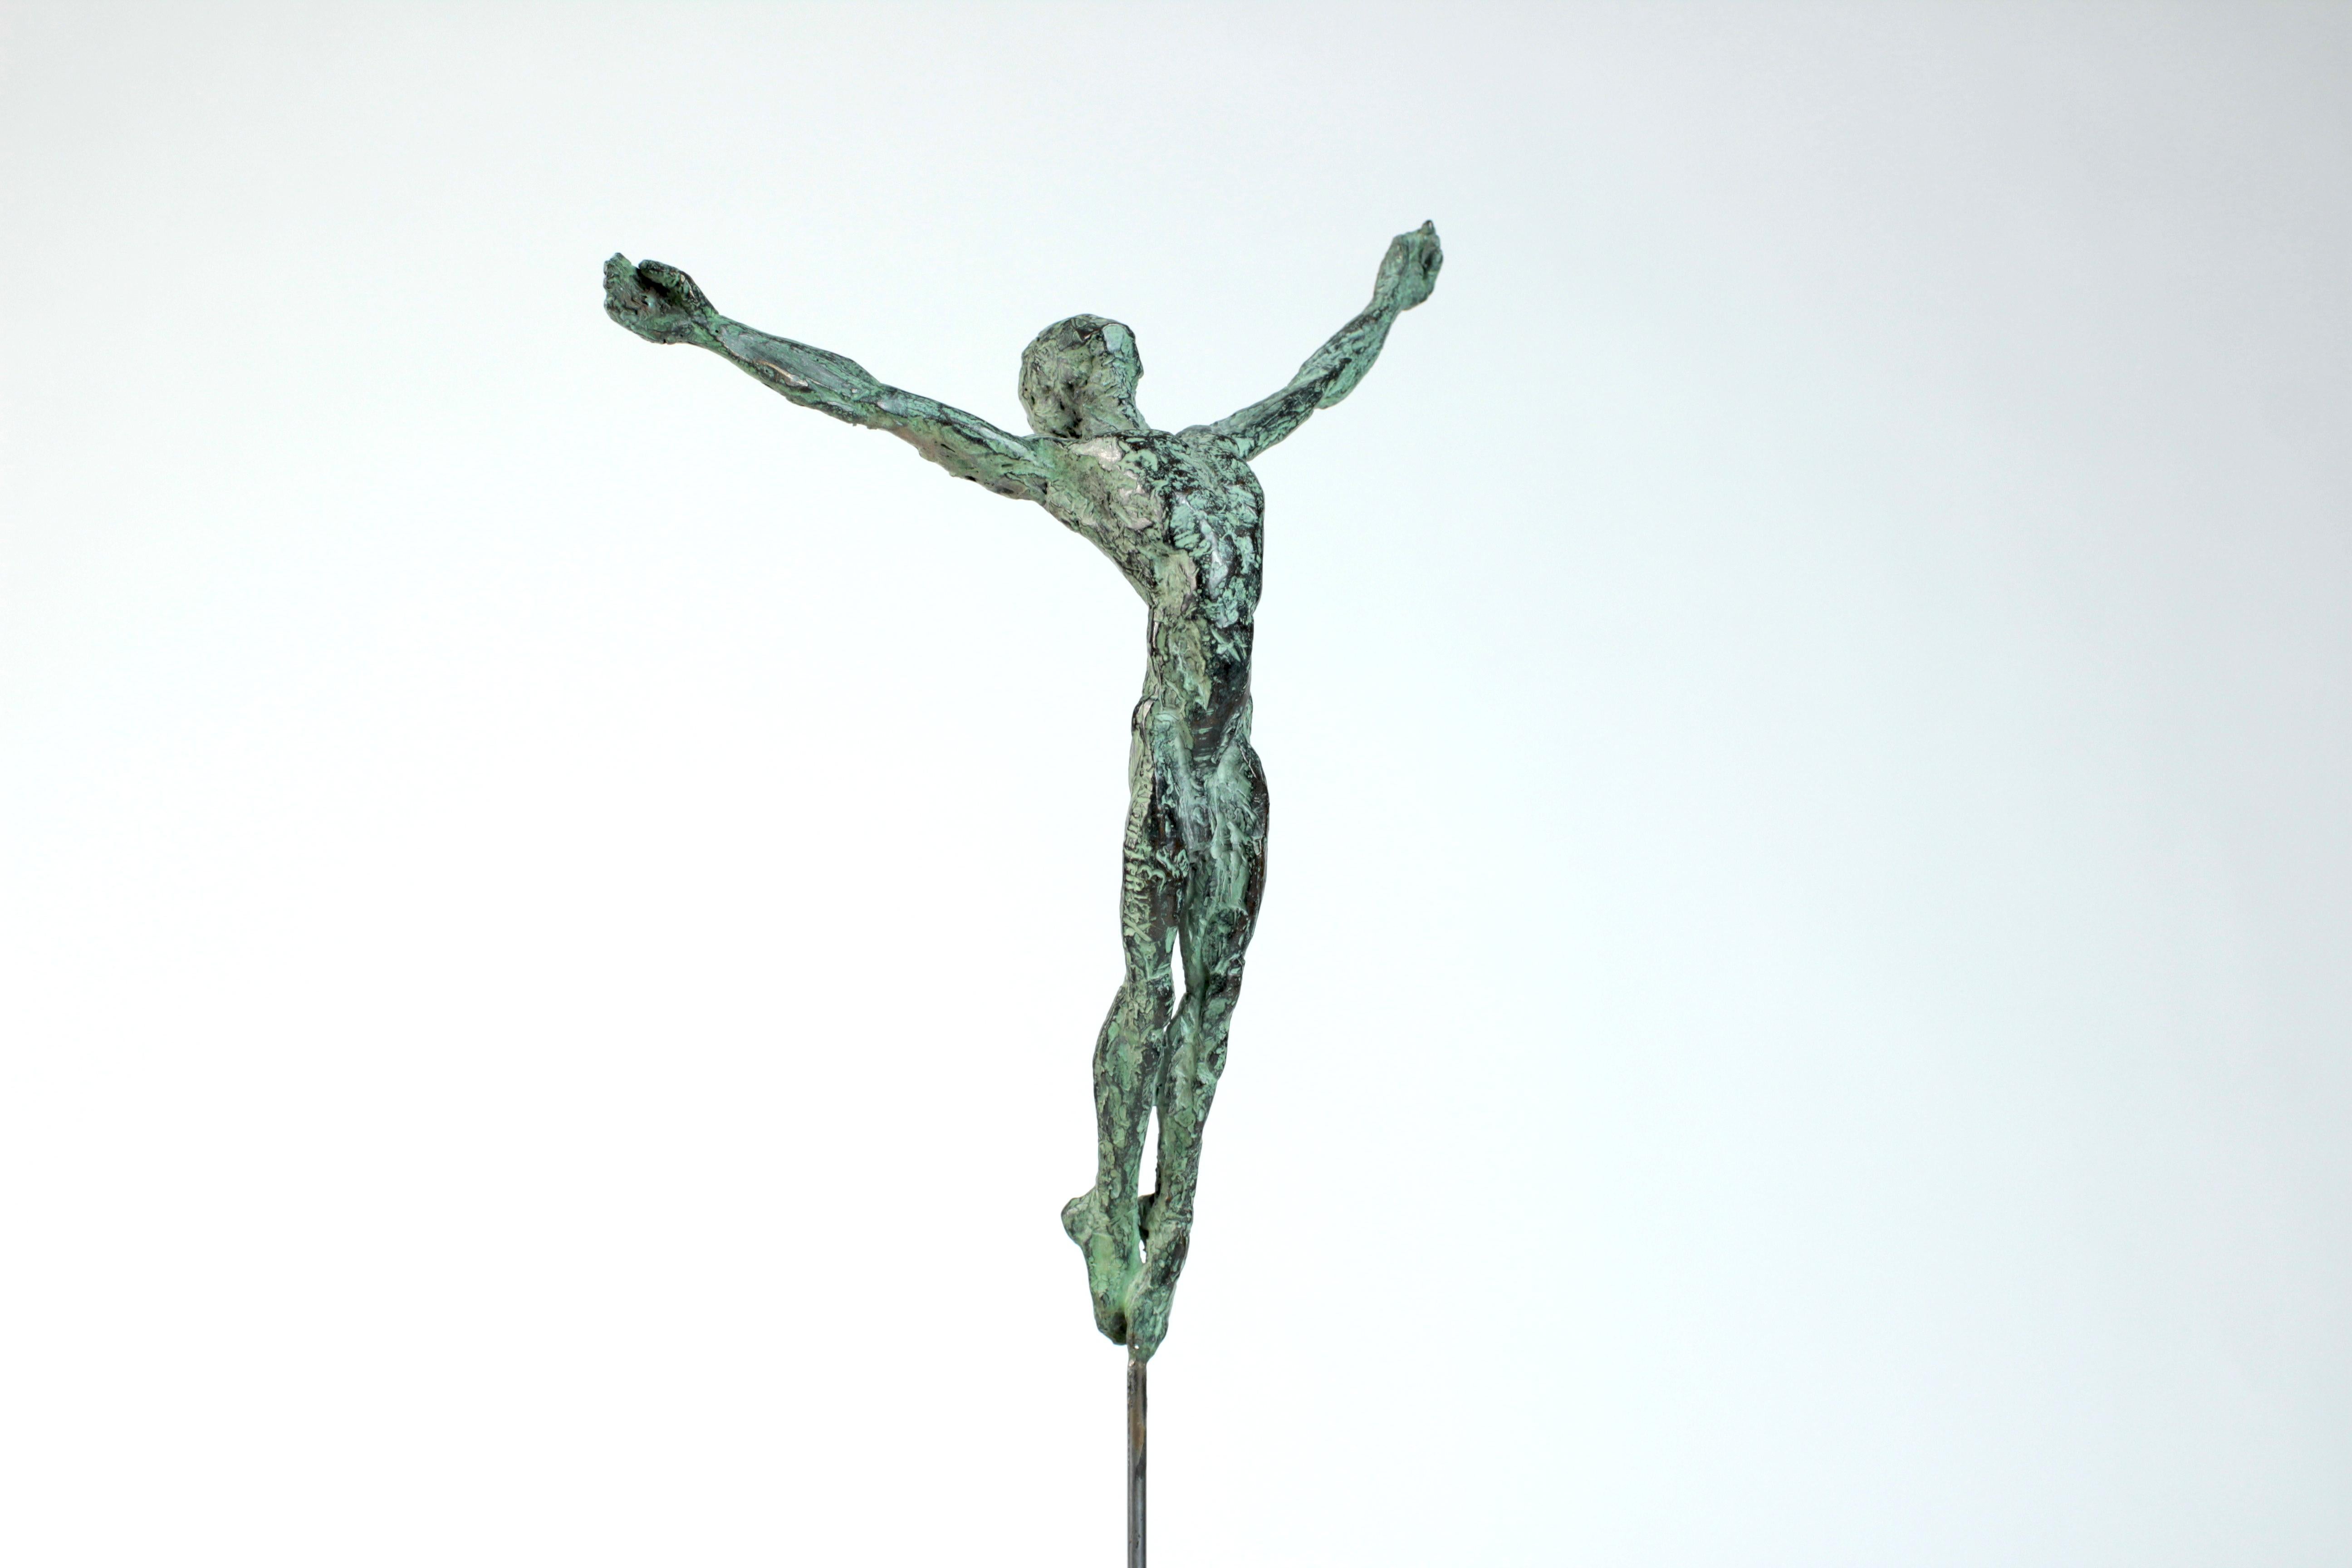 Dancer “Takeoff” II is a bronze sculpture by contemporary artist Yann Guillon, dimensions are 25 × 15 × 8 cm (9.8 × 5.9 × 3.1 in). Height of the sculpture with the metal base: 40 cm (15.7 in). 
The sculpture is signed and numbered, it is part of a